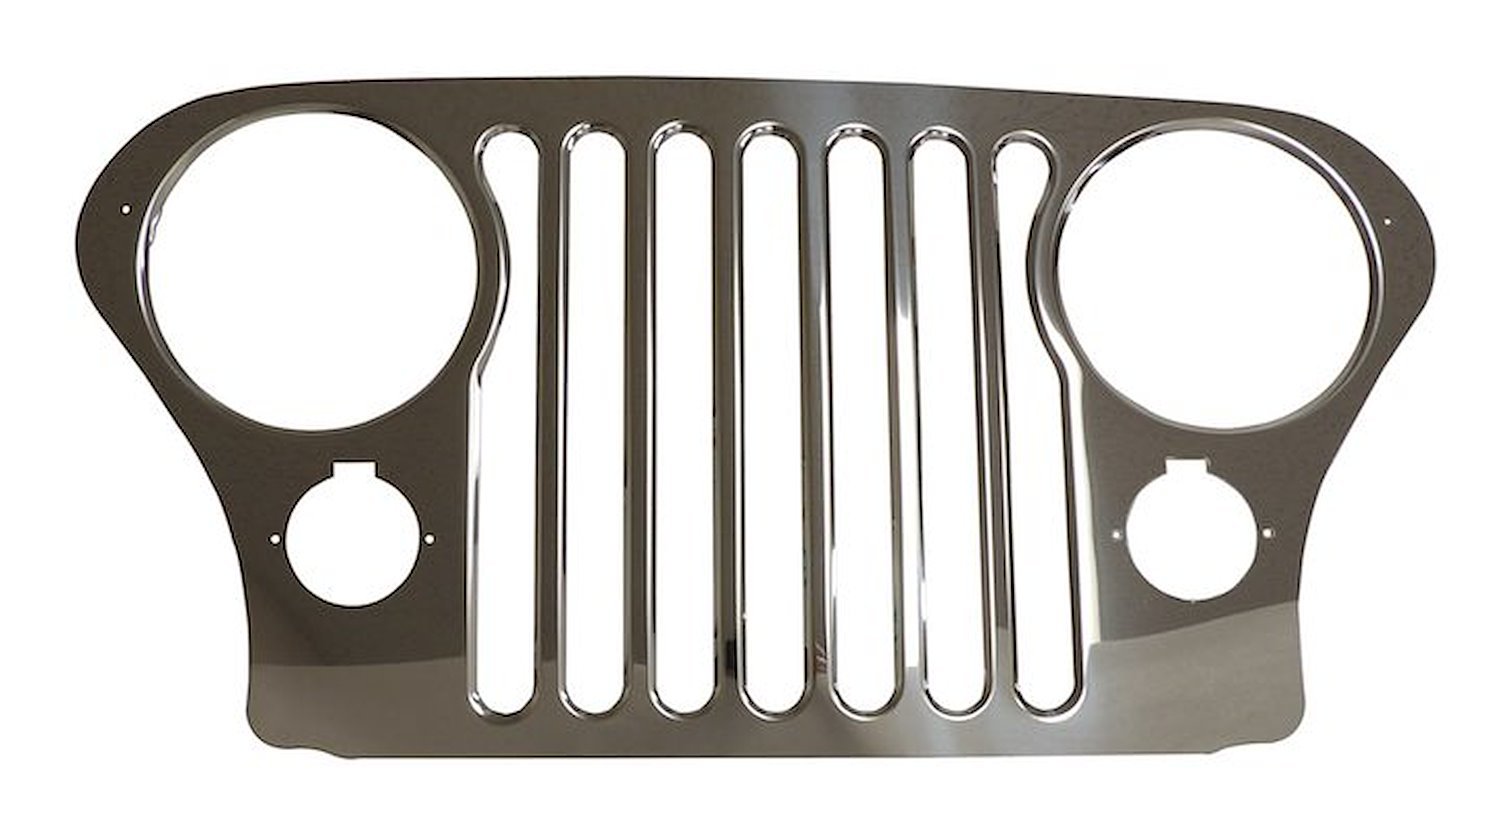 RT34086 Stainless Steel Grille Overlay for 1976-1986 Jeep CJ-5, CJ-7, & CJ-8 (Has 2 Screws in Parking Light Lens)